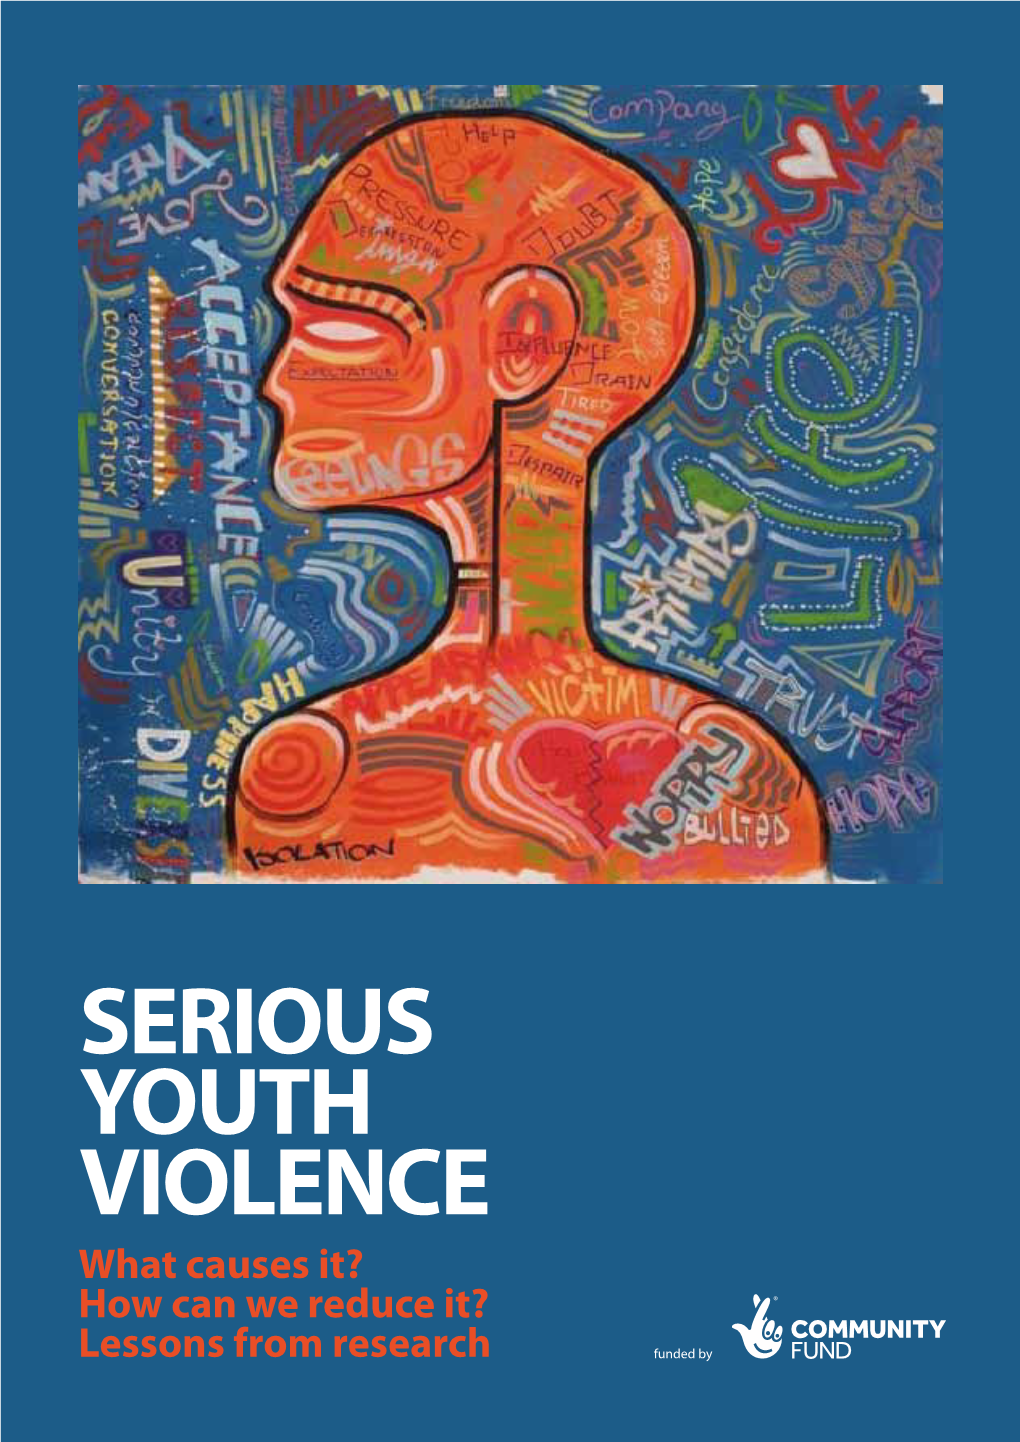 Serious Youth Violence What Causes It? How Can We Reduce It?